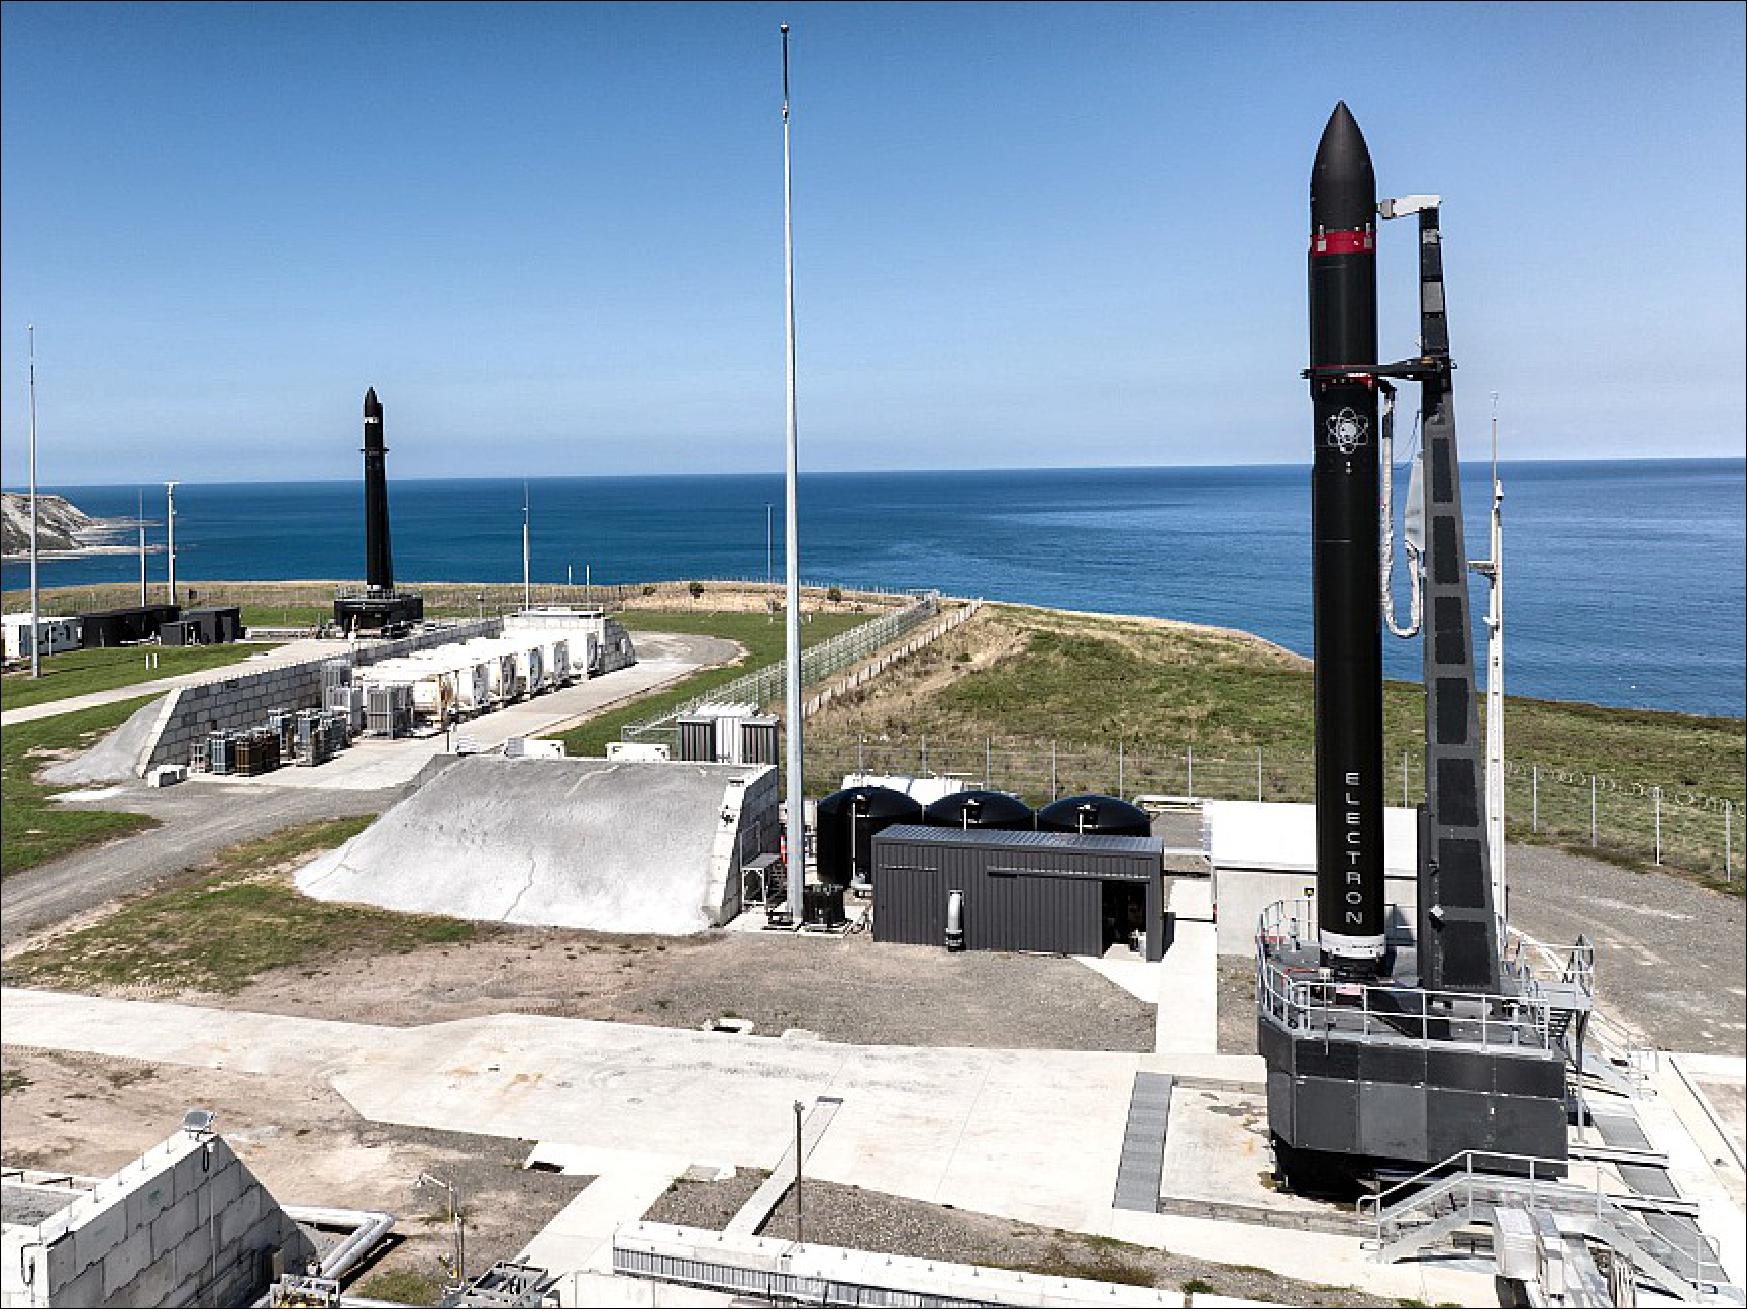 Figure 17: Rocket Lab’s Launch Complex 1, Pad B, New Zealand. The new pad is Rocket Lab’s third for the Company’s Electron launch vehicle and joins the existing Pad A at Launch Complex 1 and a third launch pad at Rocket Lab Launch Complex 2 in Virginia, USA. With two operational pads within the same launch complex, Rocket Lab doubles the launch capacity of its Electron launch vehicle (image credit: Rocket Lab)